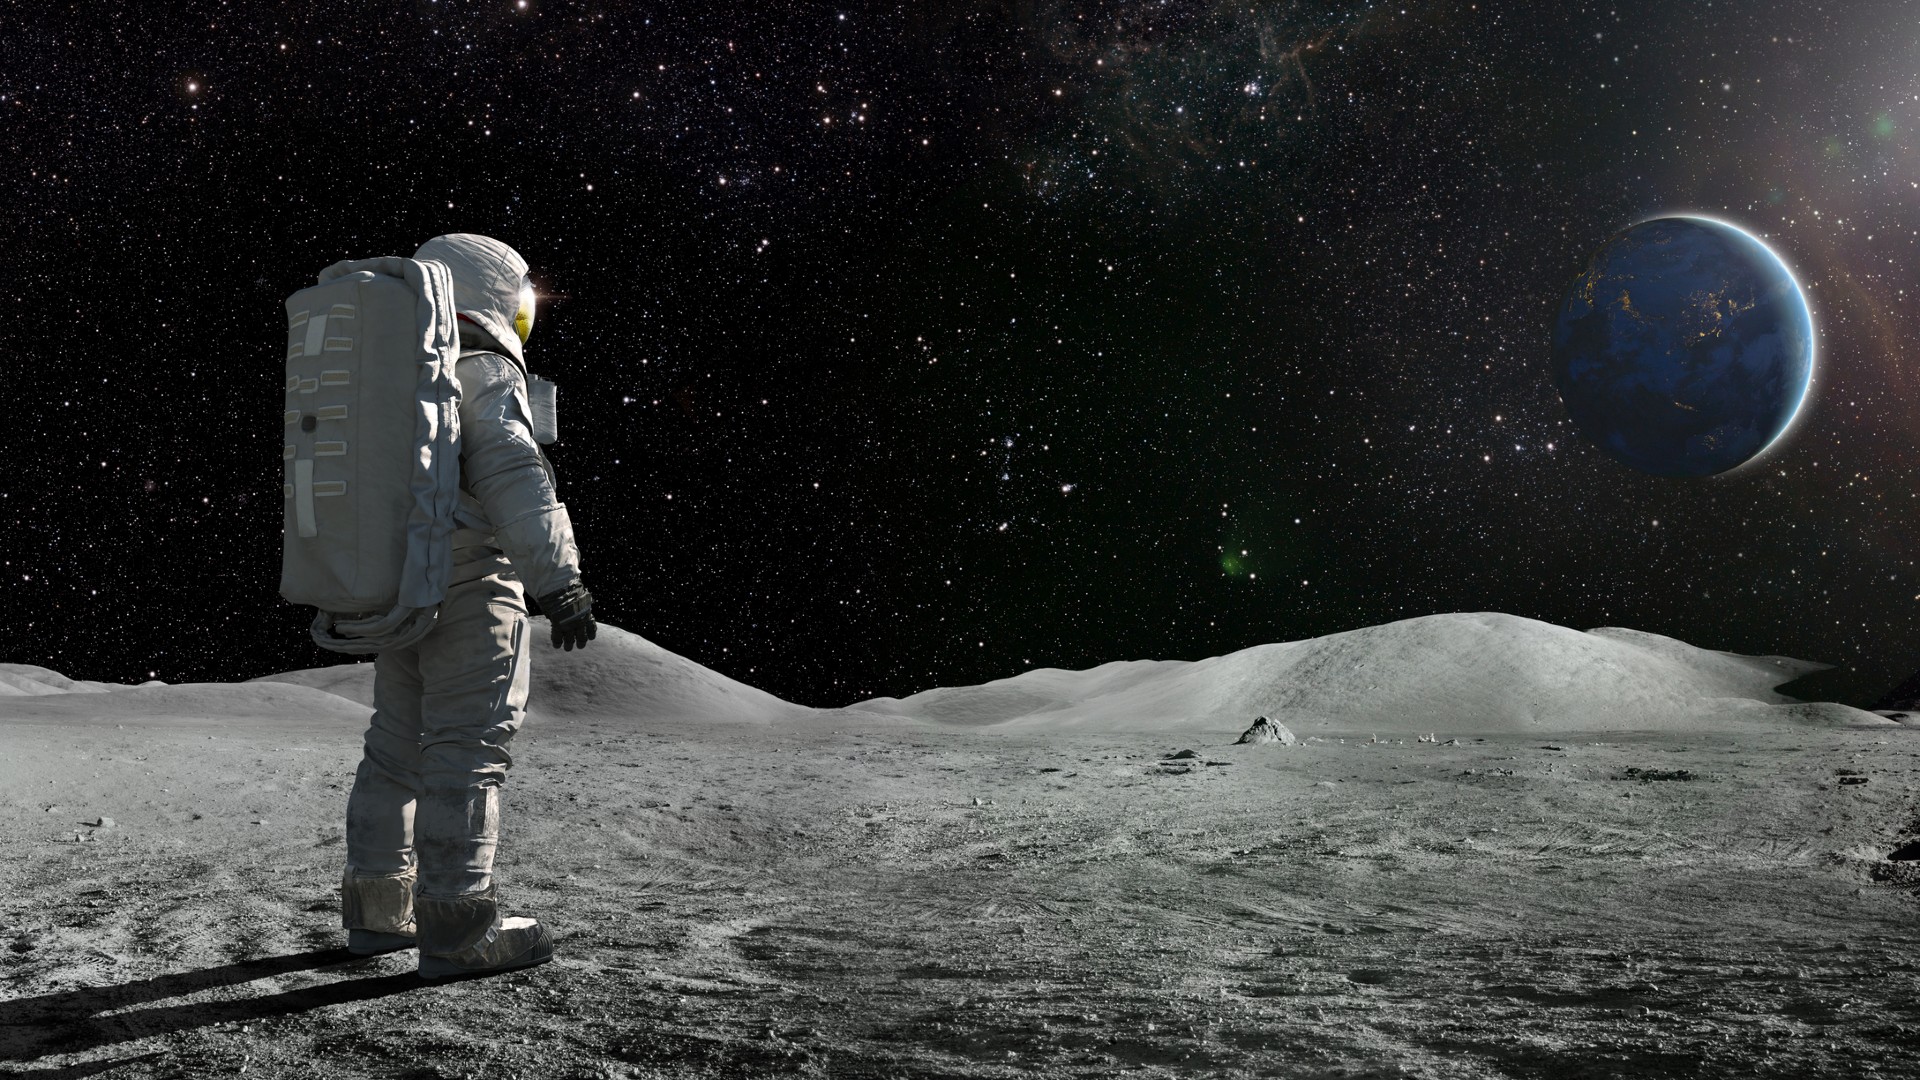 Artemis mission astronauts will plant plants on the moon in 2026